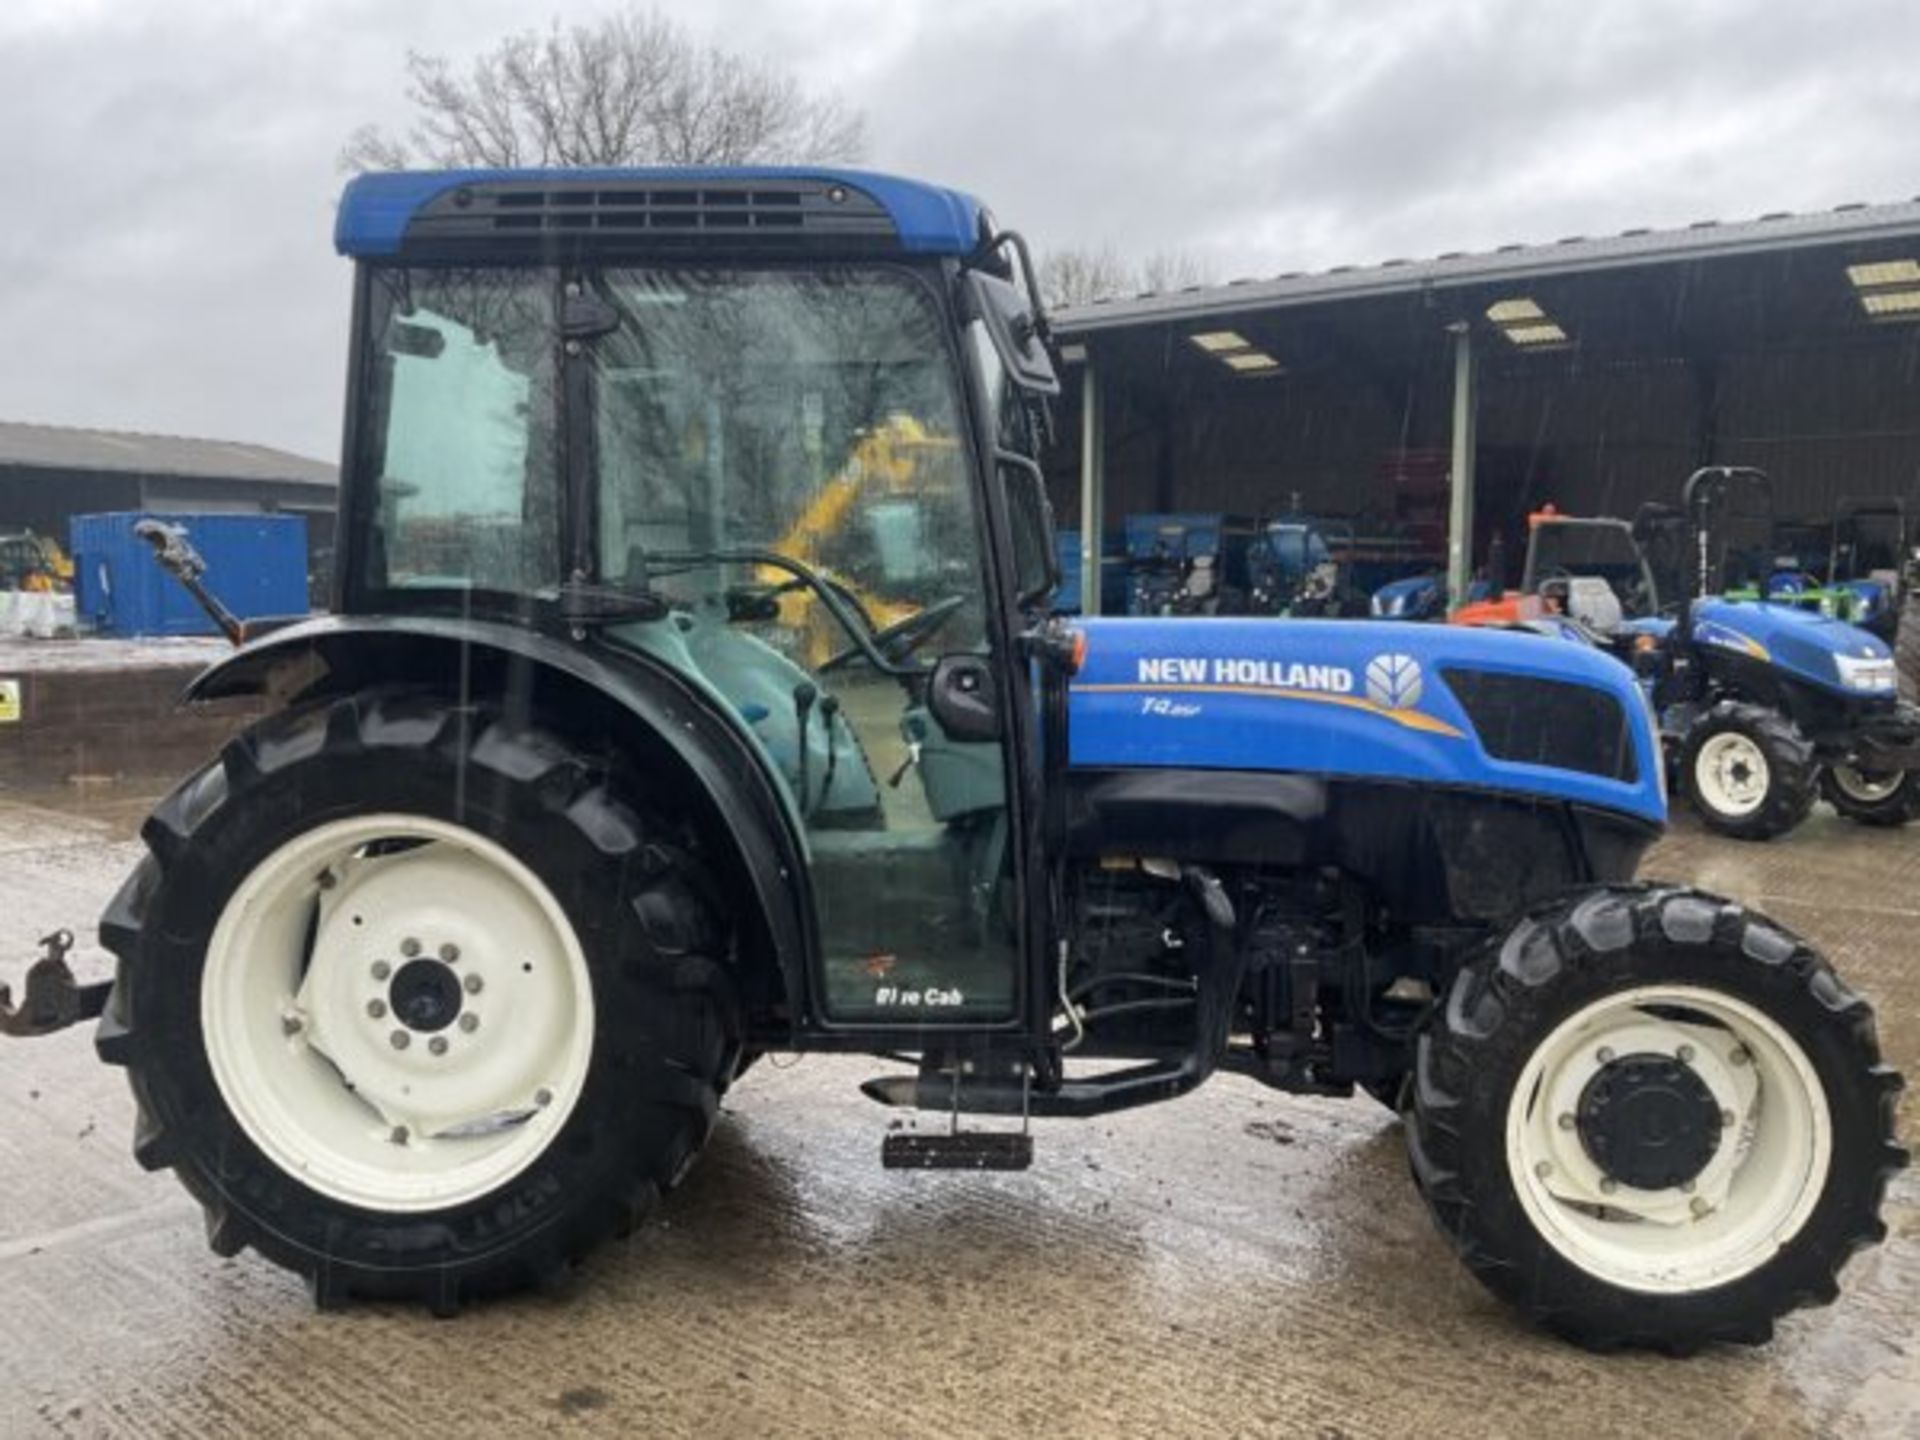 NEW HOLLAND T4.85F 5268 HOURS.